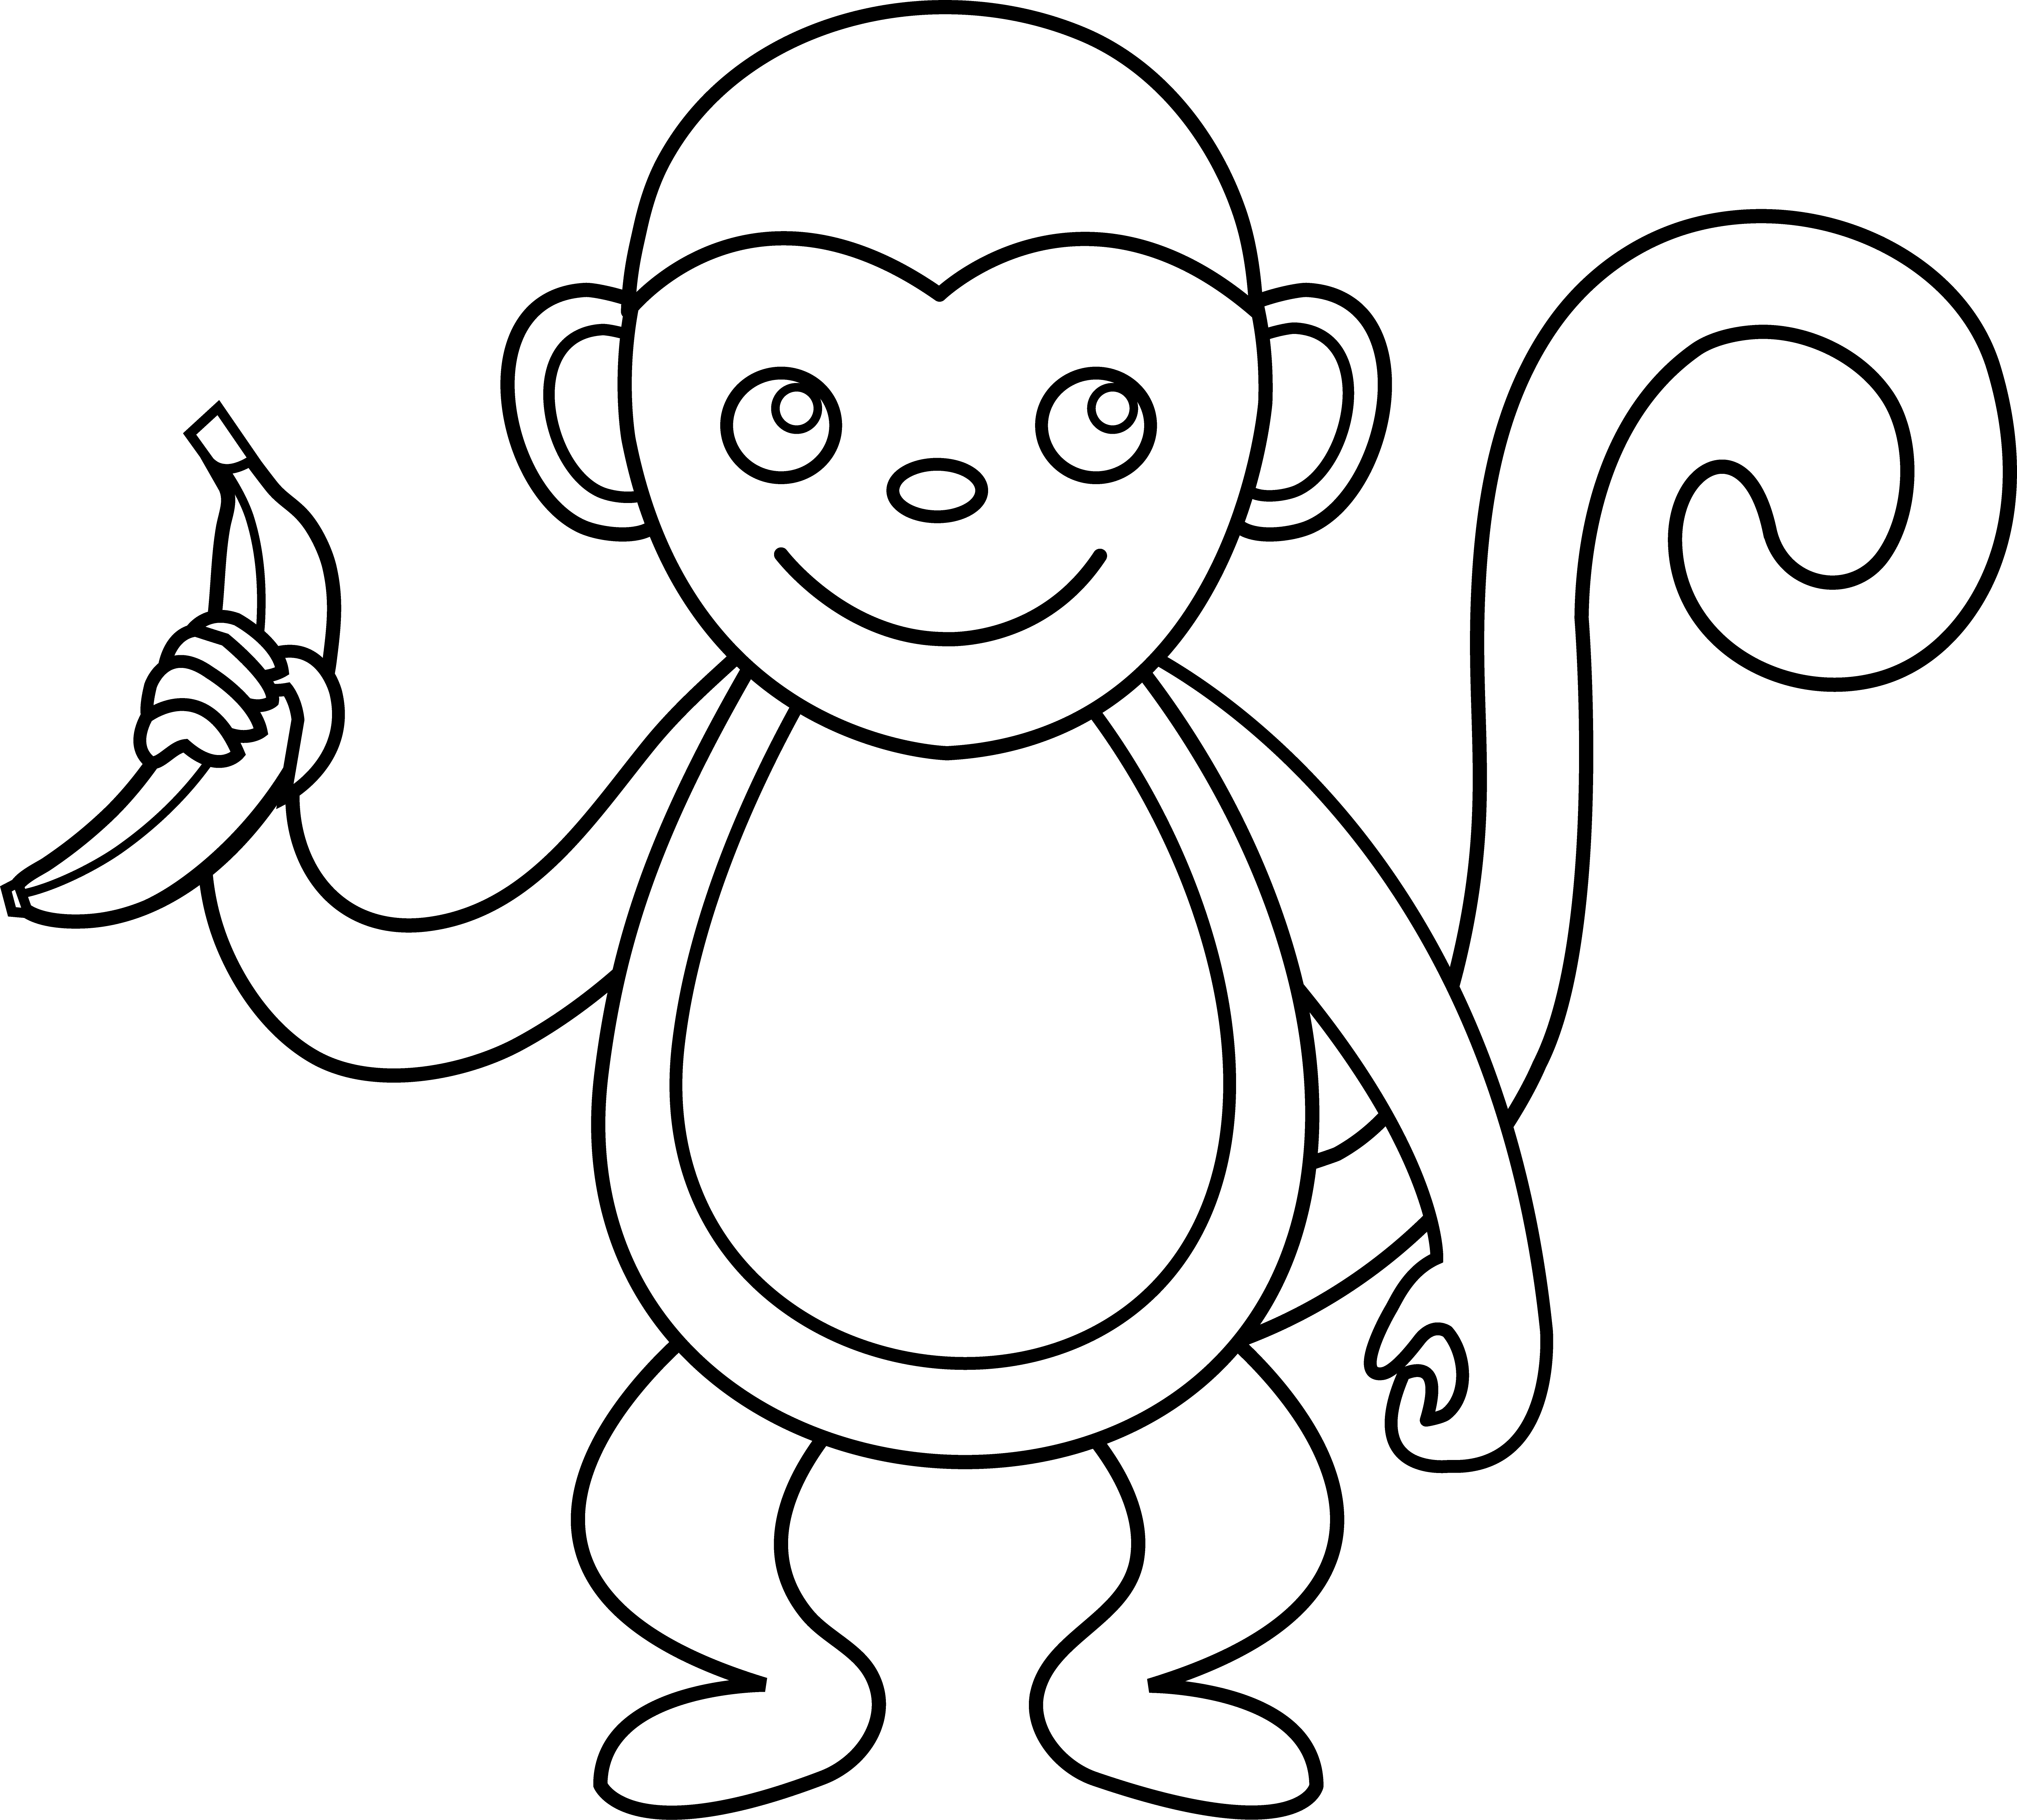 free-outline-of-a-monkey-download-free-outline-of-a-monkey-png-images